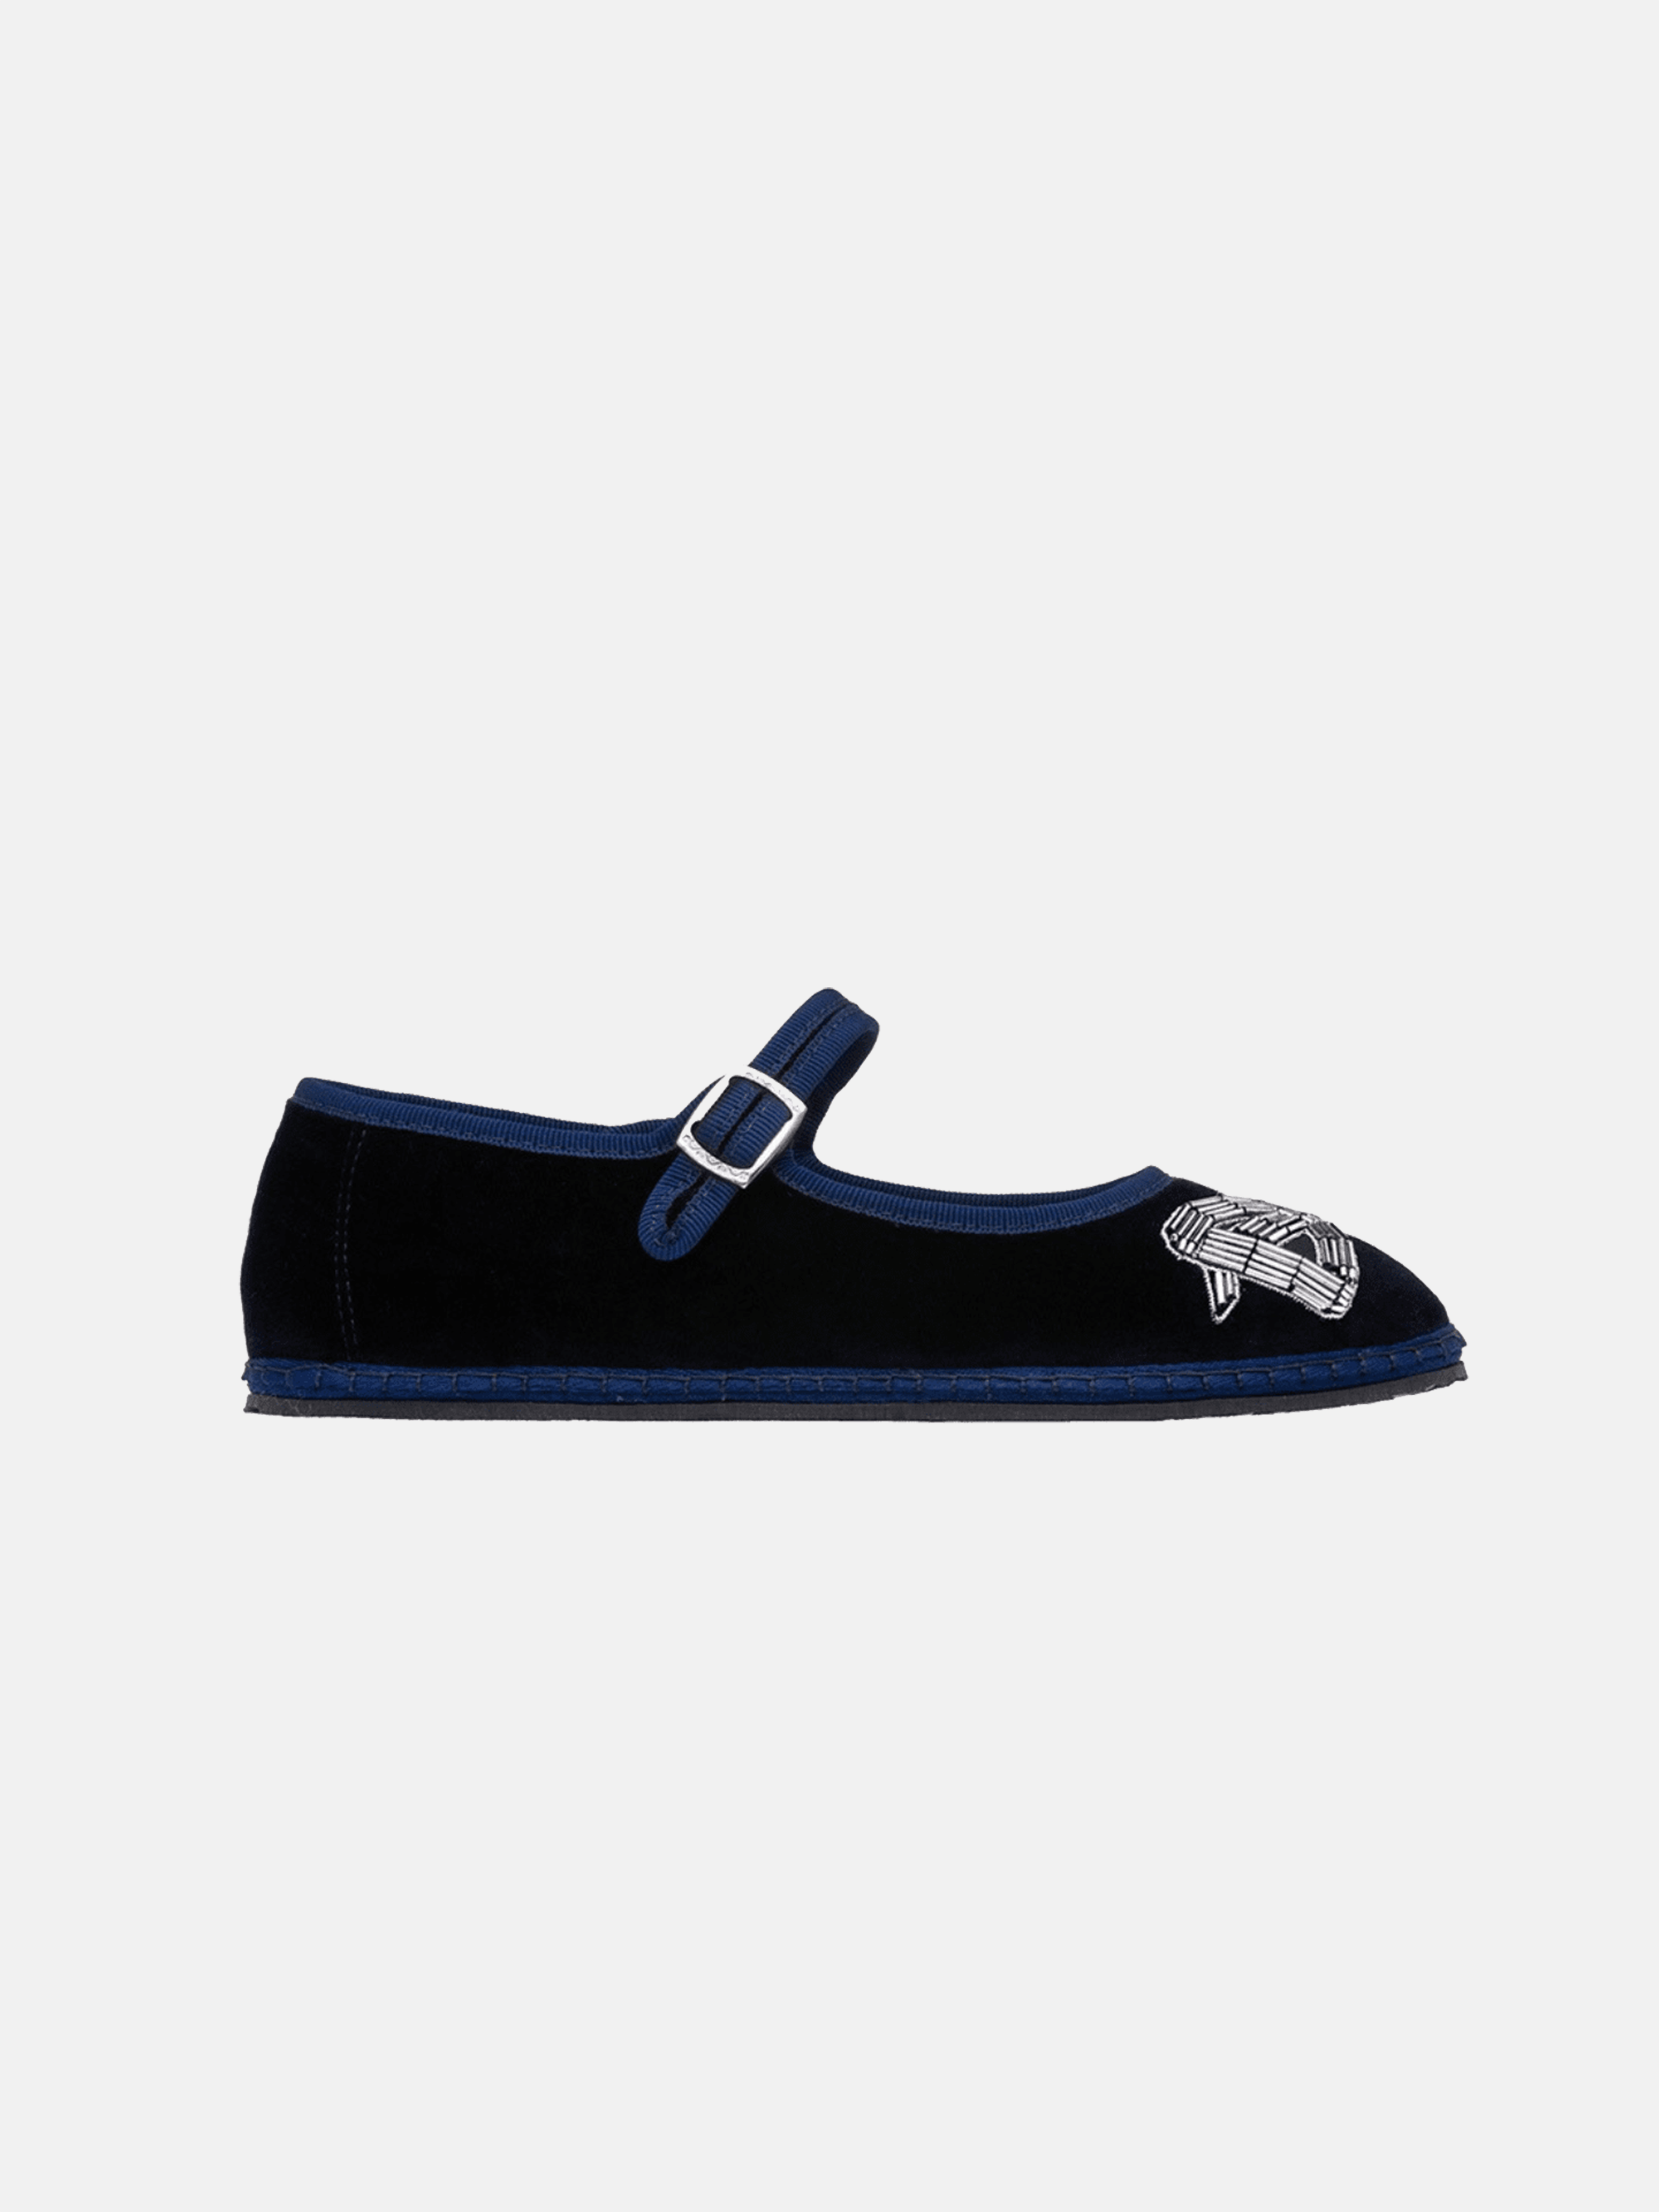 MJ Clementine Navy Bow Embroidery